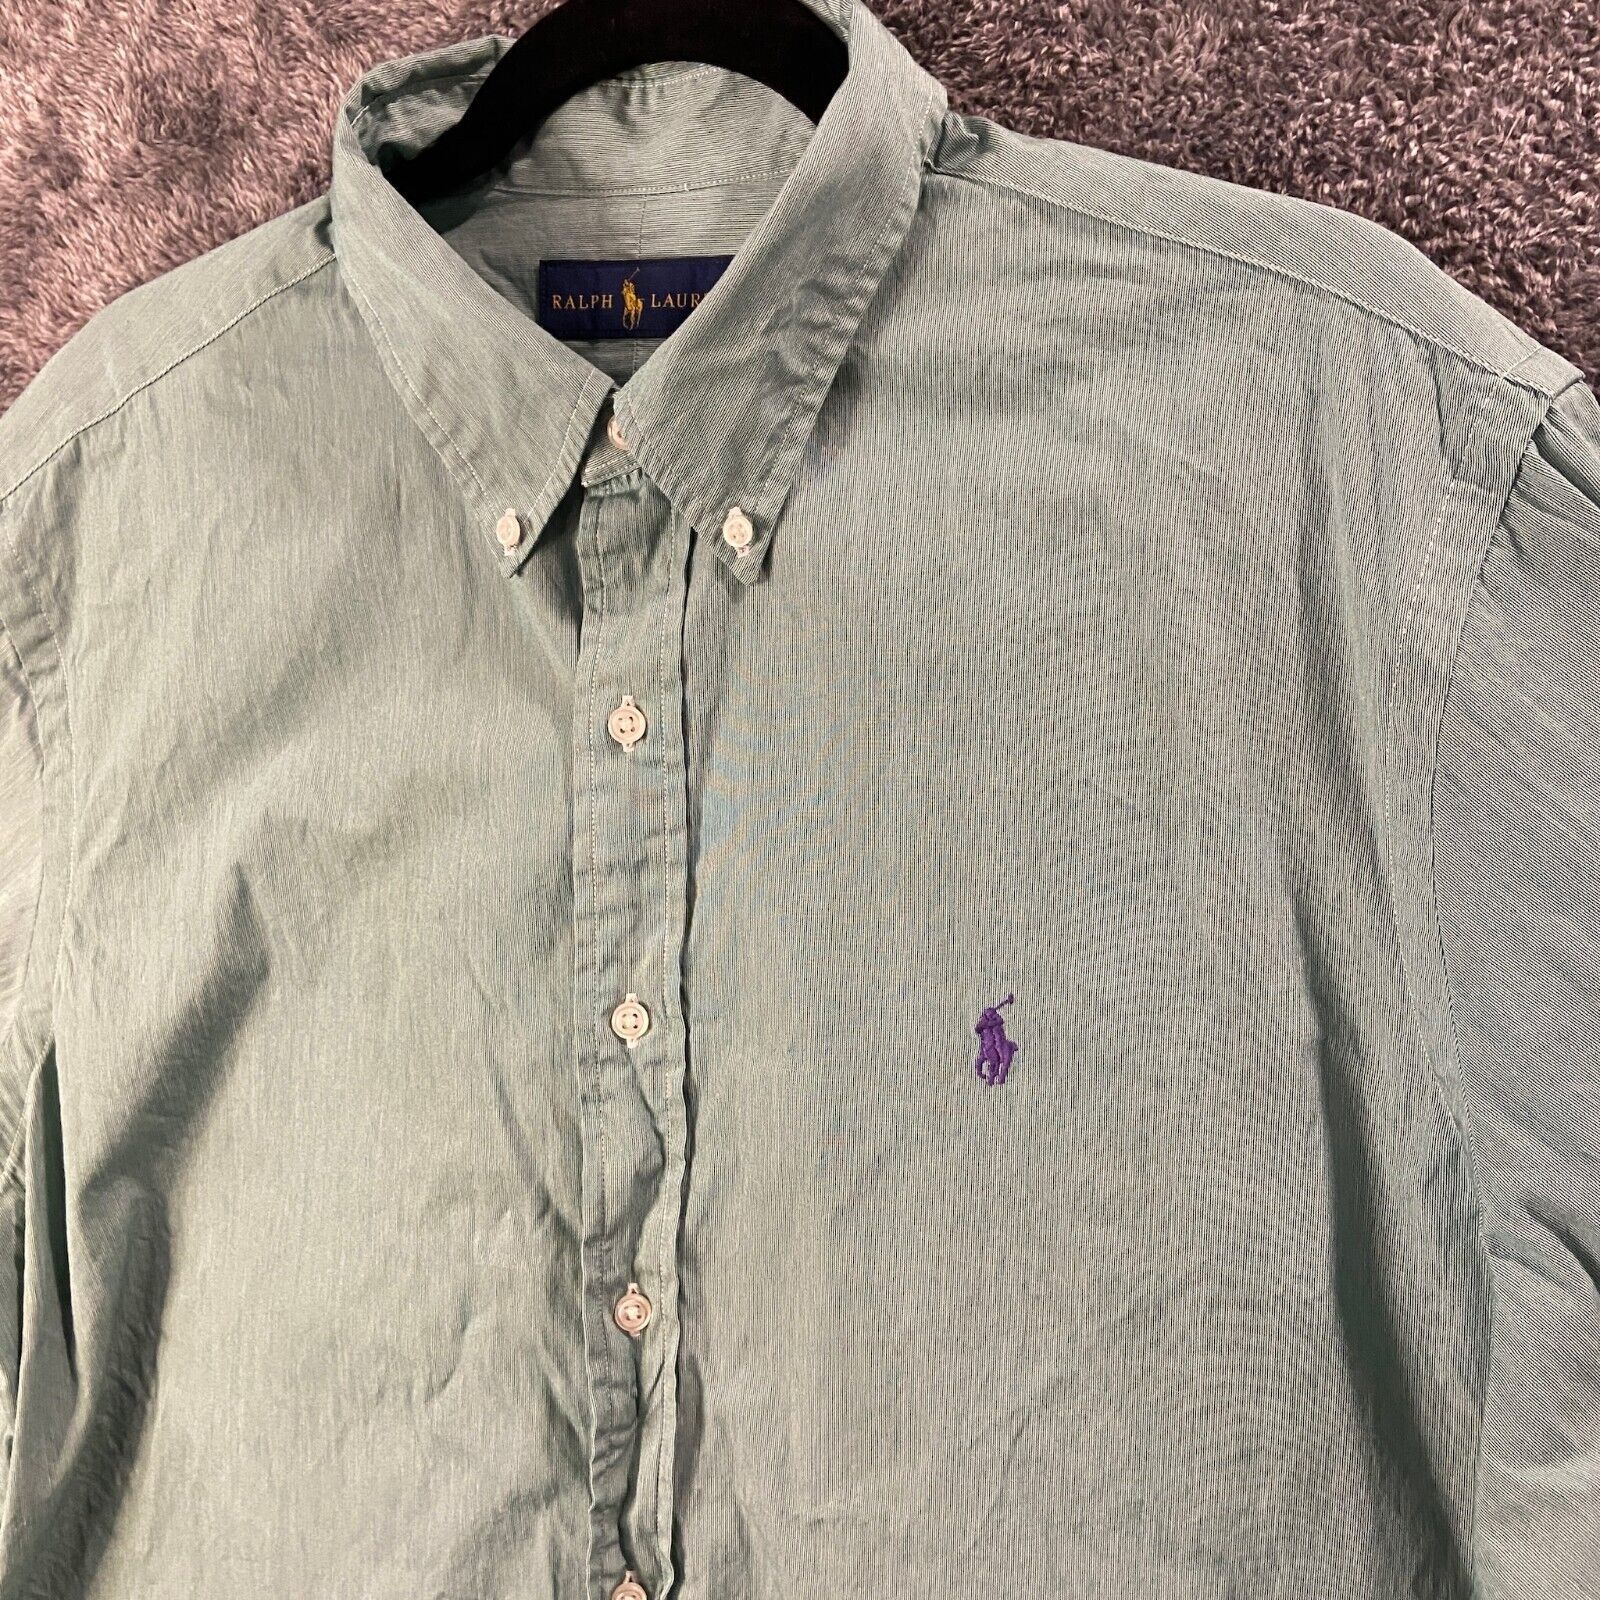 Primary image for Ralph Lauren Dress Shirt Mens 17.5 44 Green Striped Button Up Preppy Purple Pony